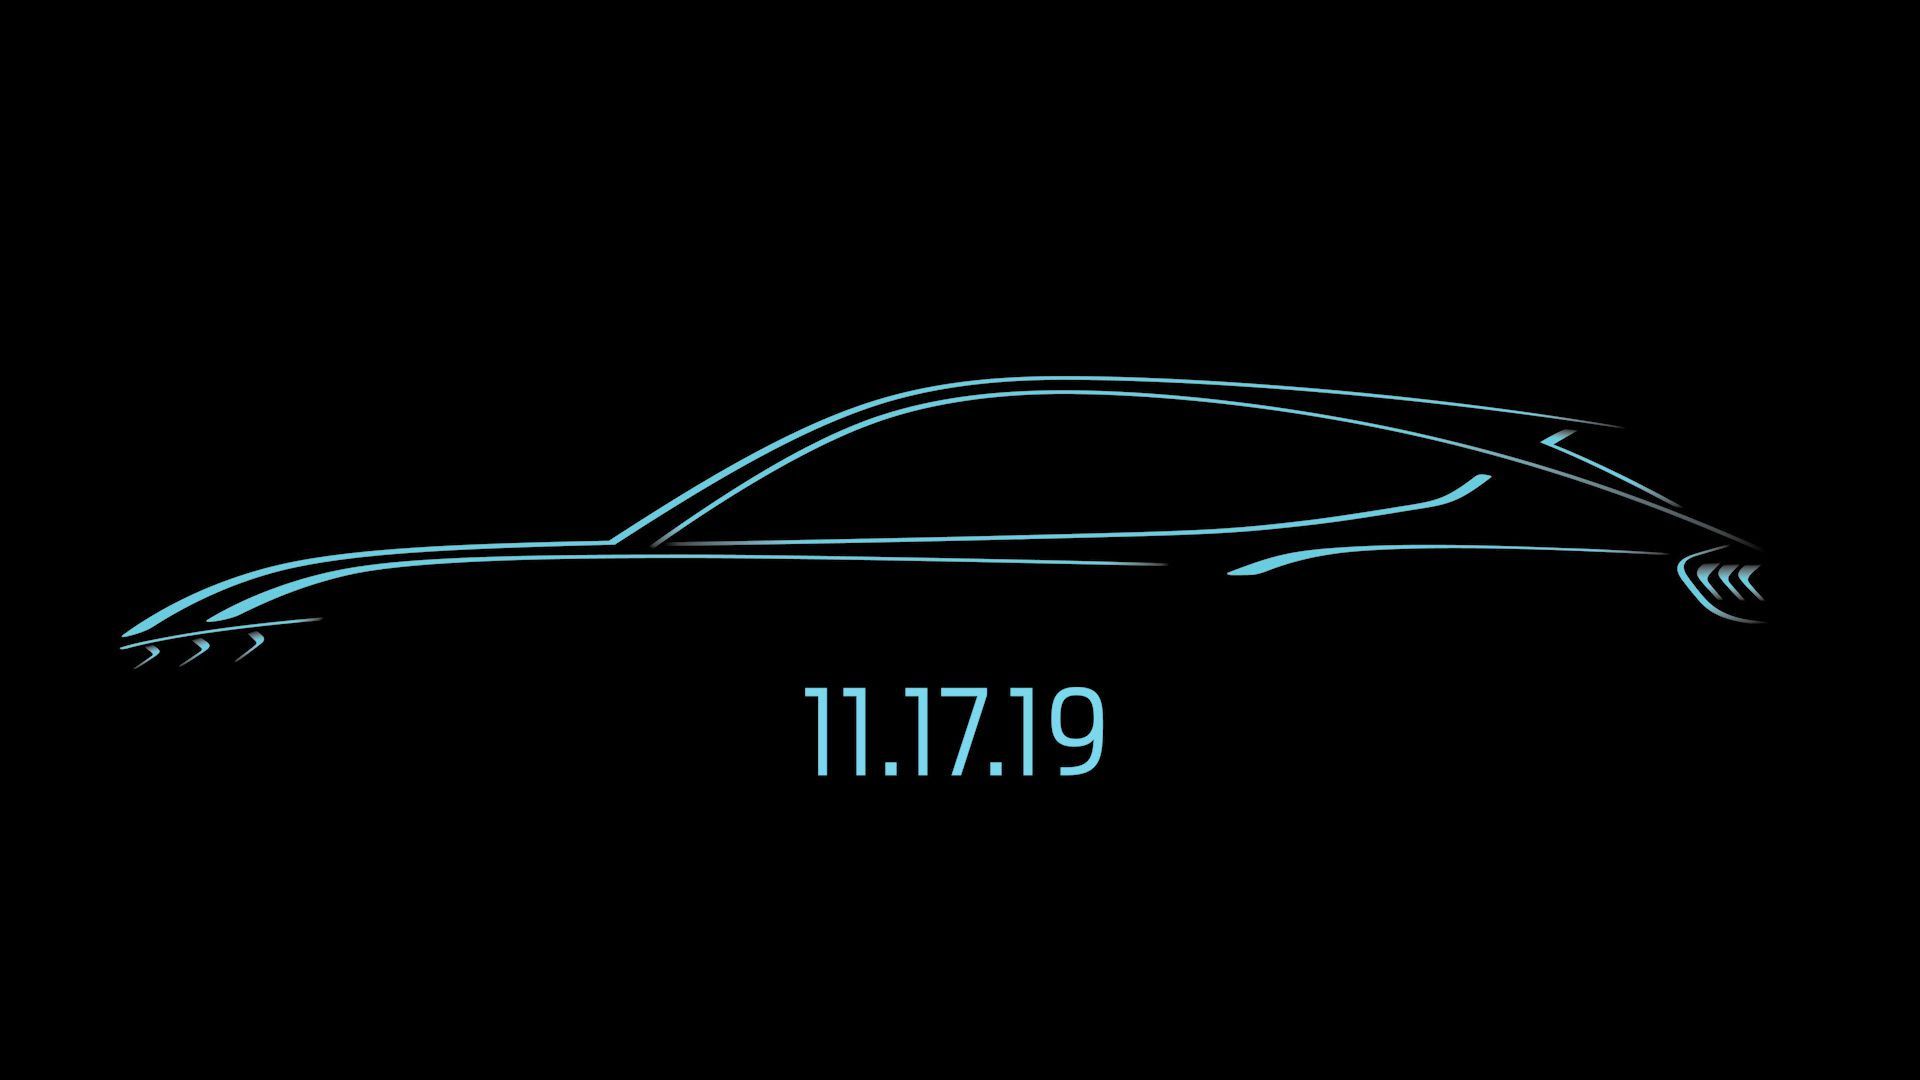 A graphic announcing the debut date of Ford's Mustang Mach-E crossover